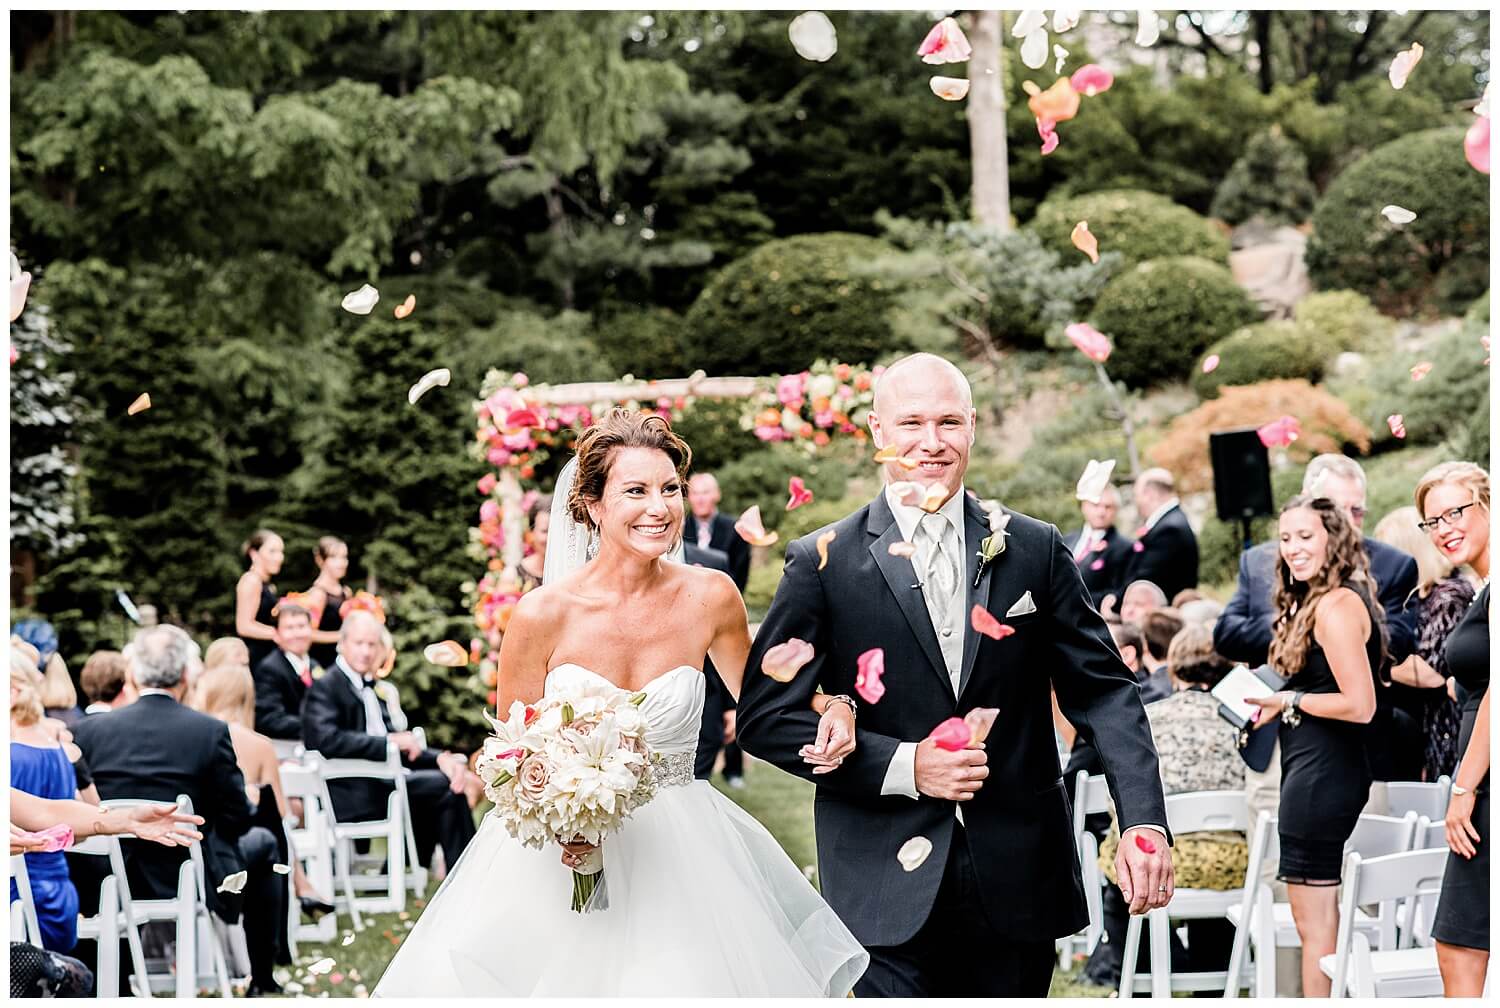 bride and groom walking down the aisle at their Cleveland Botanical Garden Wedding while guests throw flower petals at them